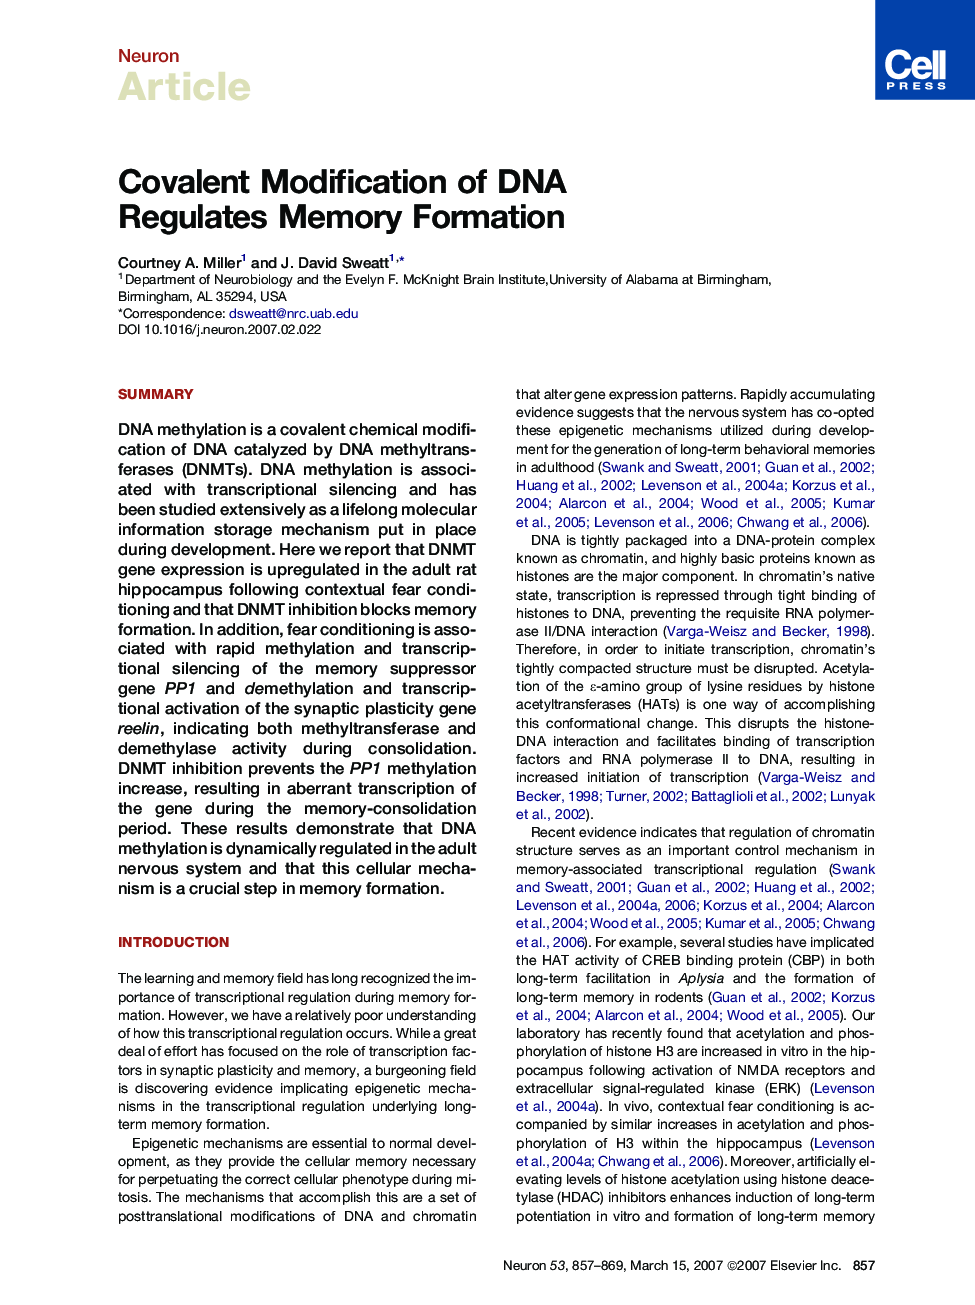 Covalent Modification of DNA Regulates Memory Formation